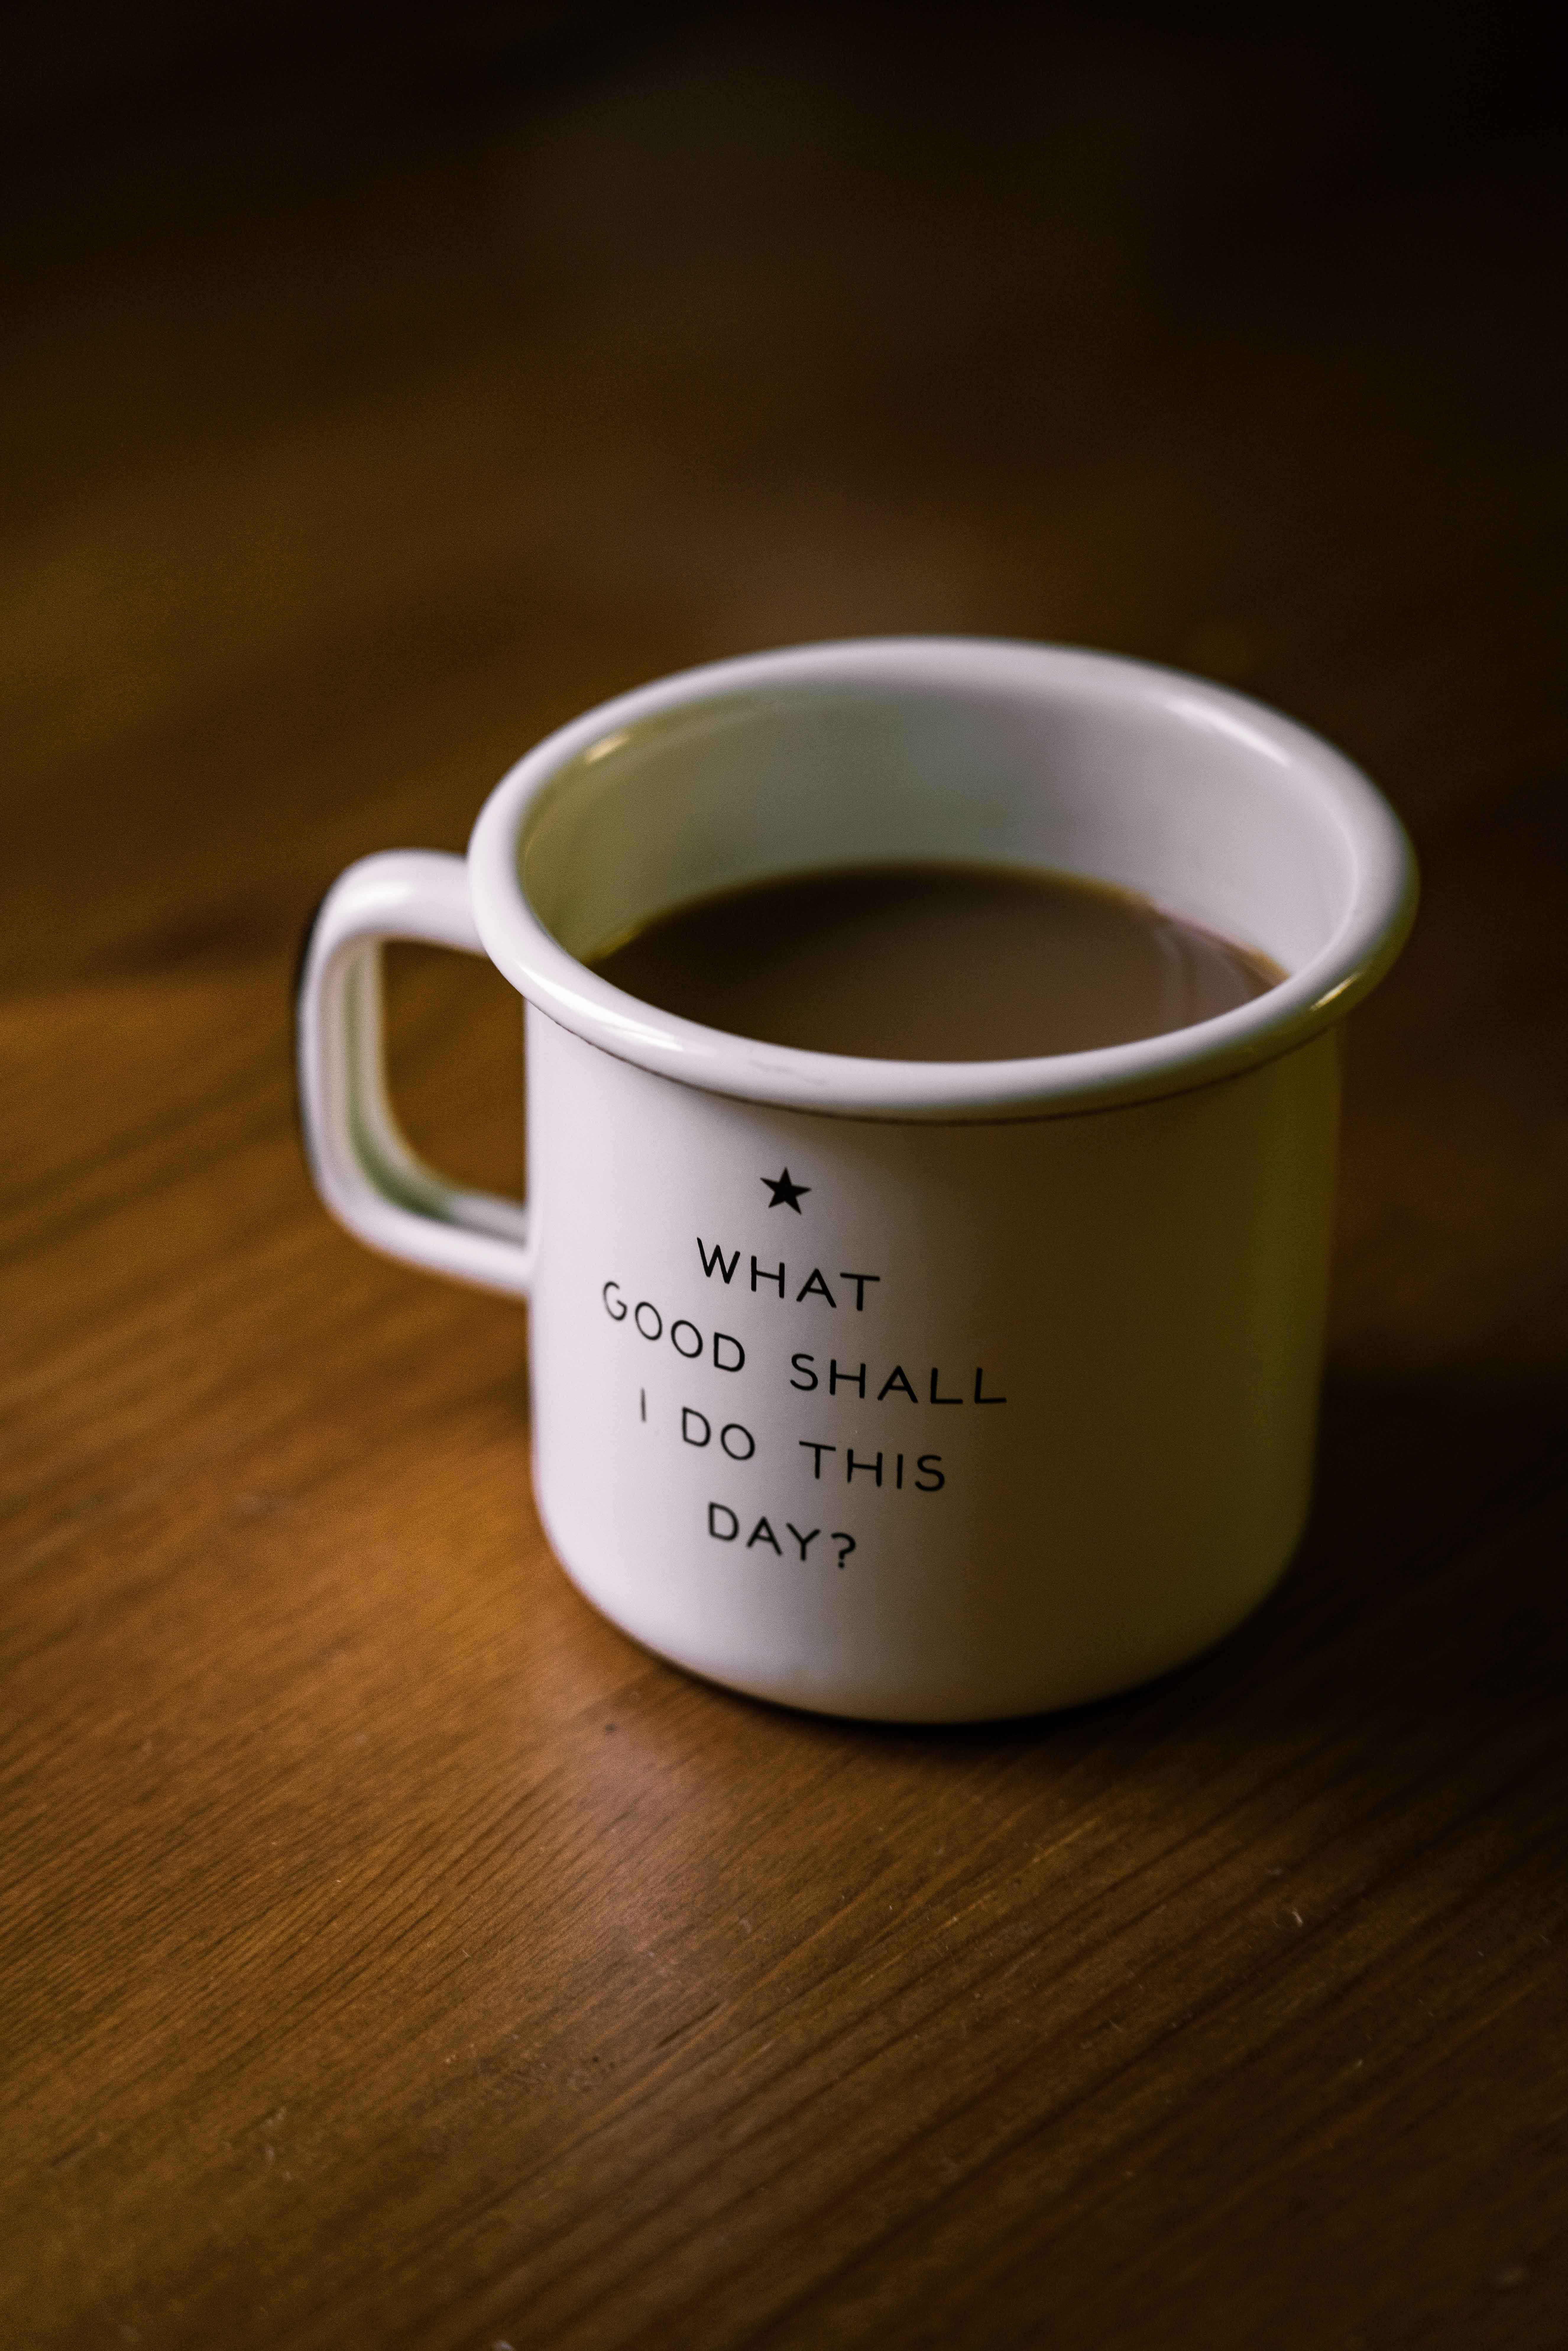 Mug with coffee in it on a table. The mug has decorative text that says "What good shall I do this day?"